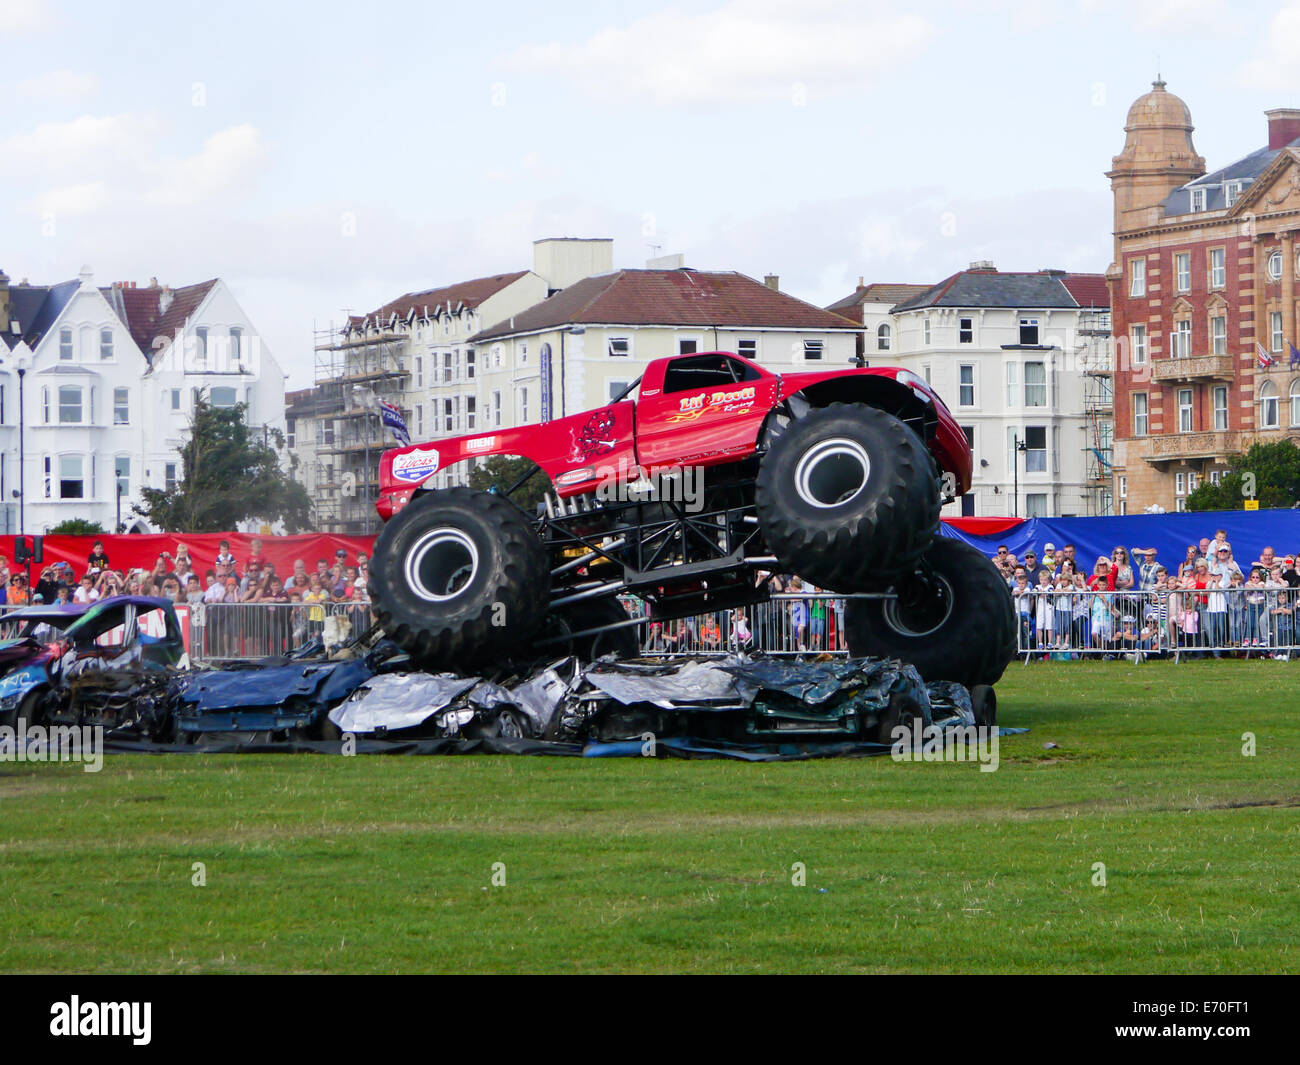 The monster truck 'lil' devil' rides over and crushes cars during the Extreme Stunt show in Portsmouth, Hampshire England Stock Photo